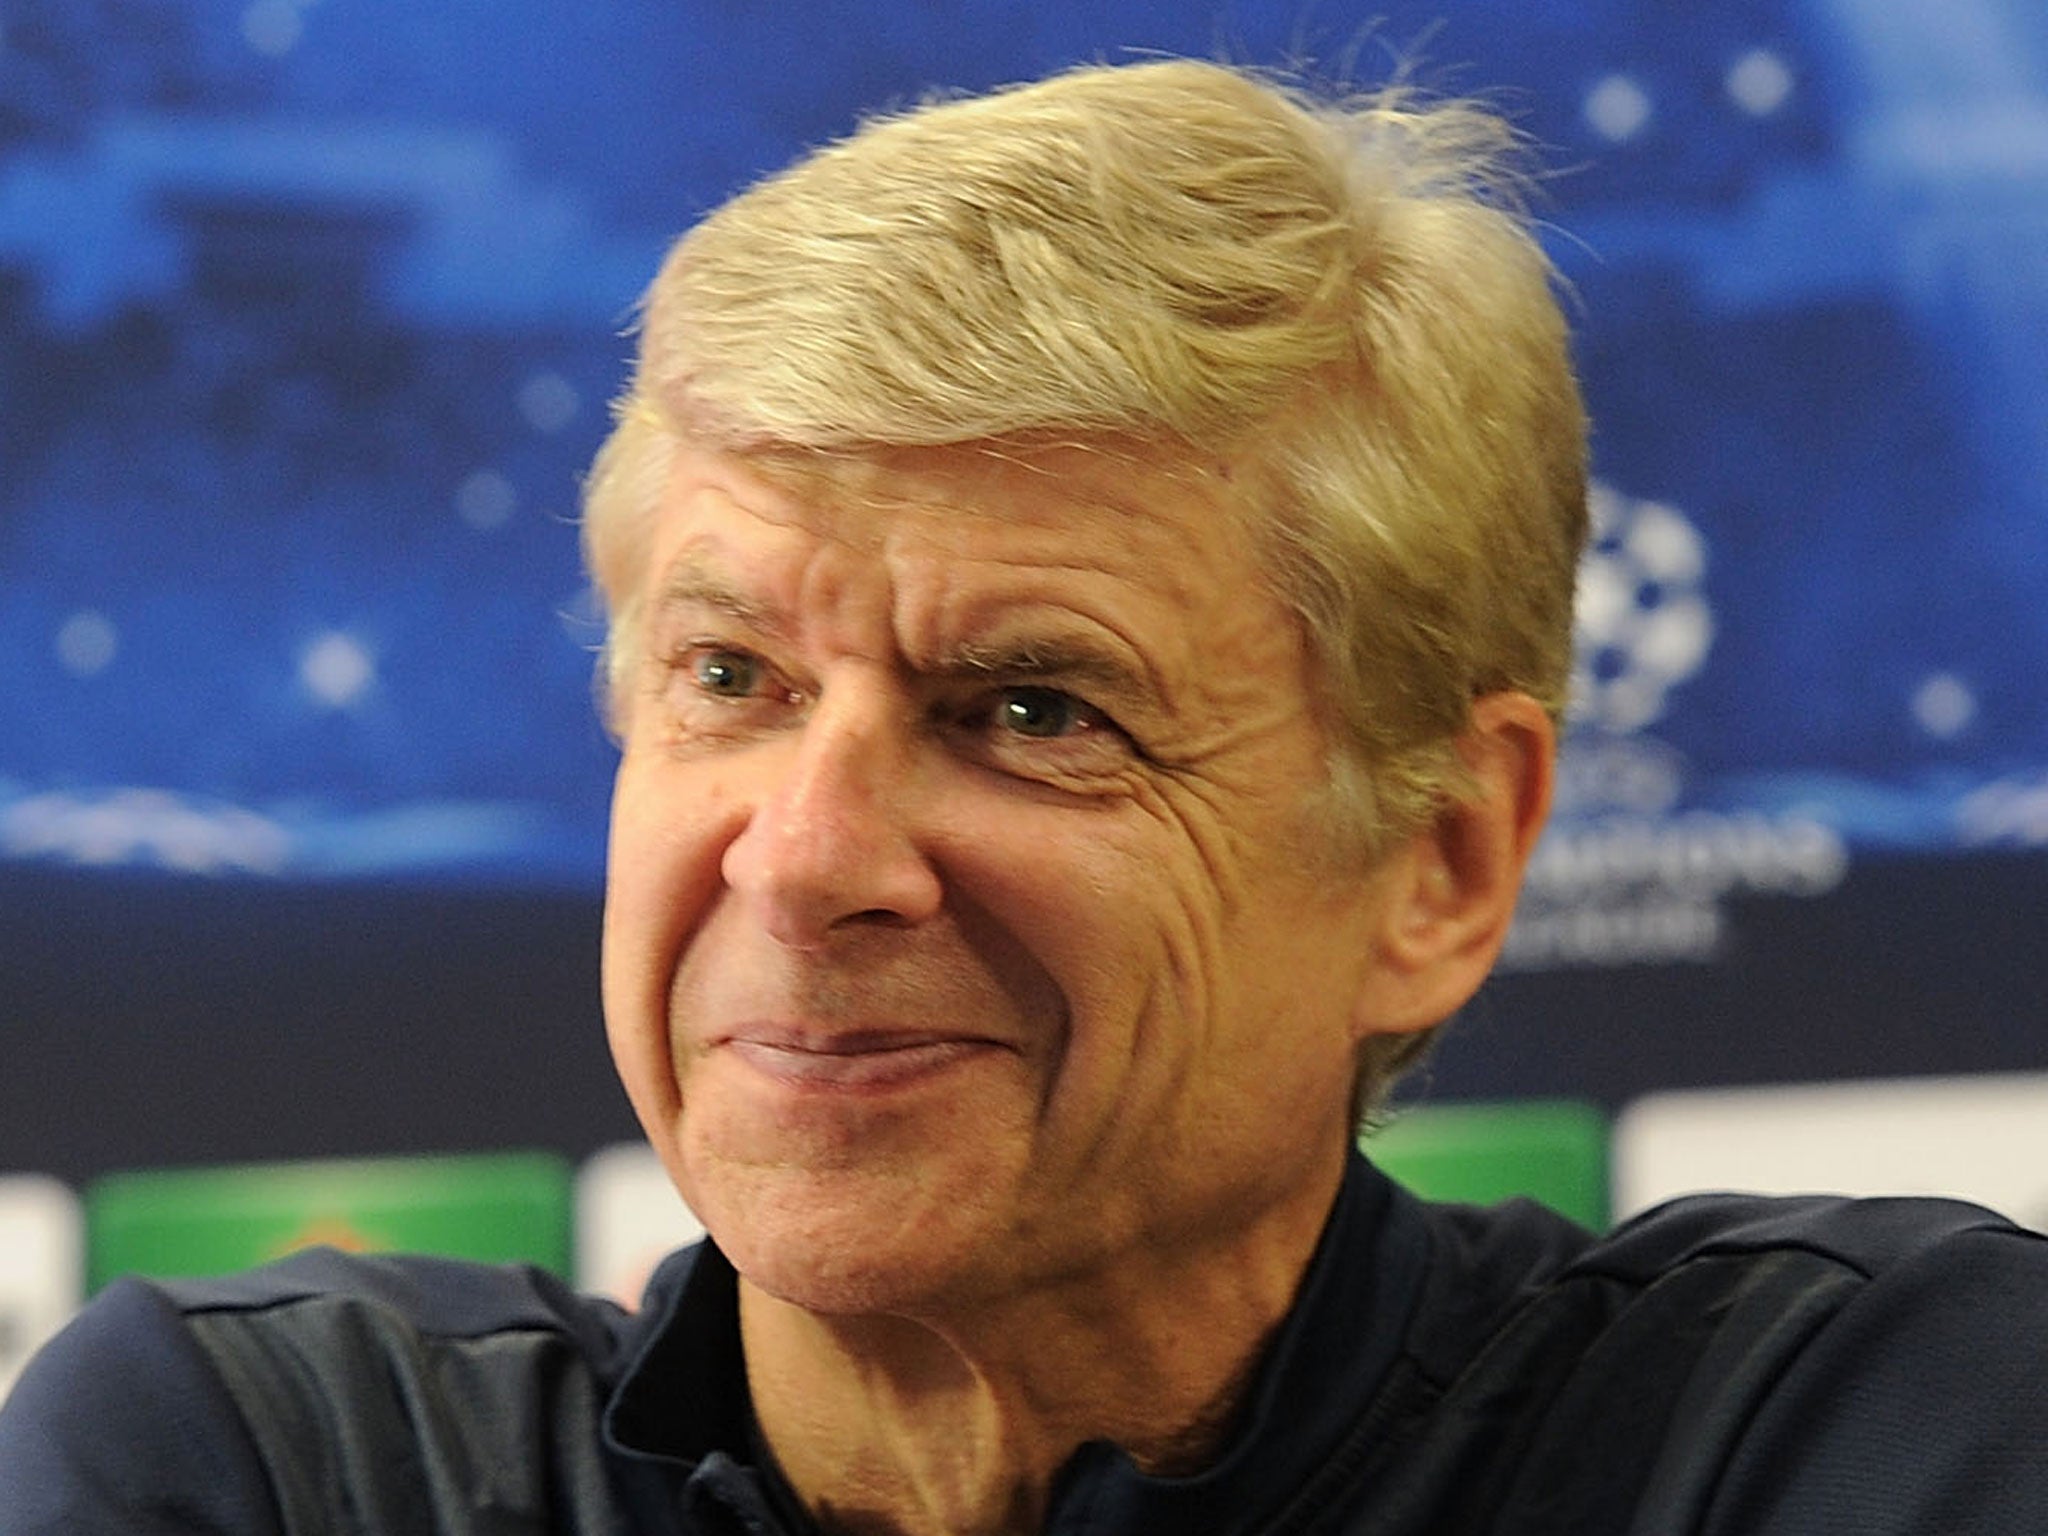 Arsene Wenger hopes to smiling again in May